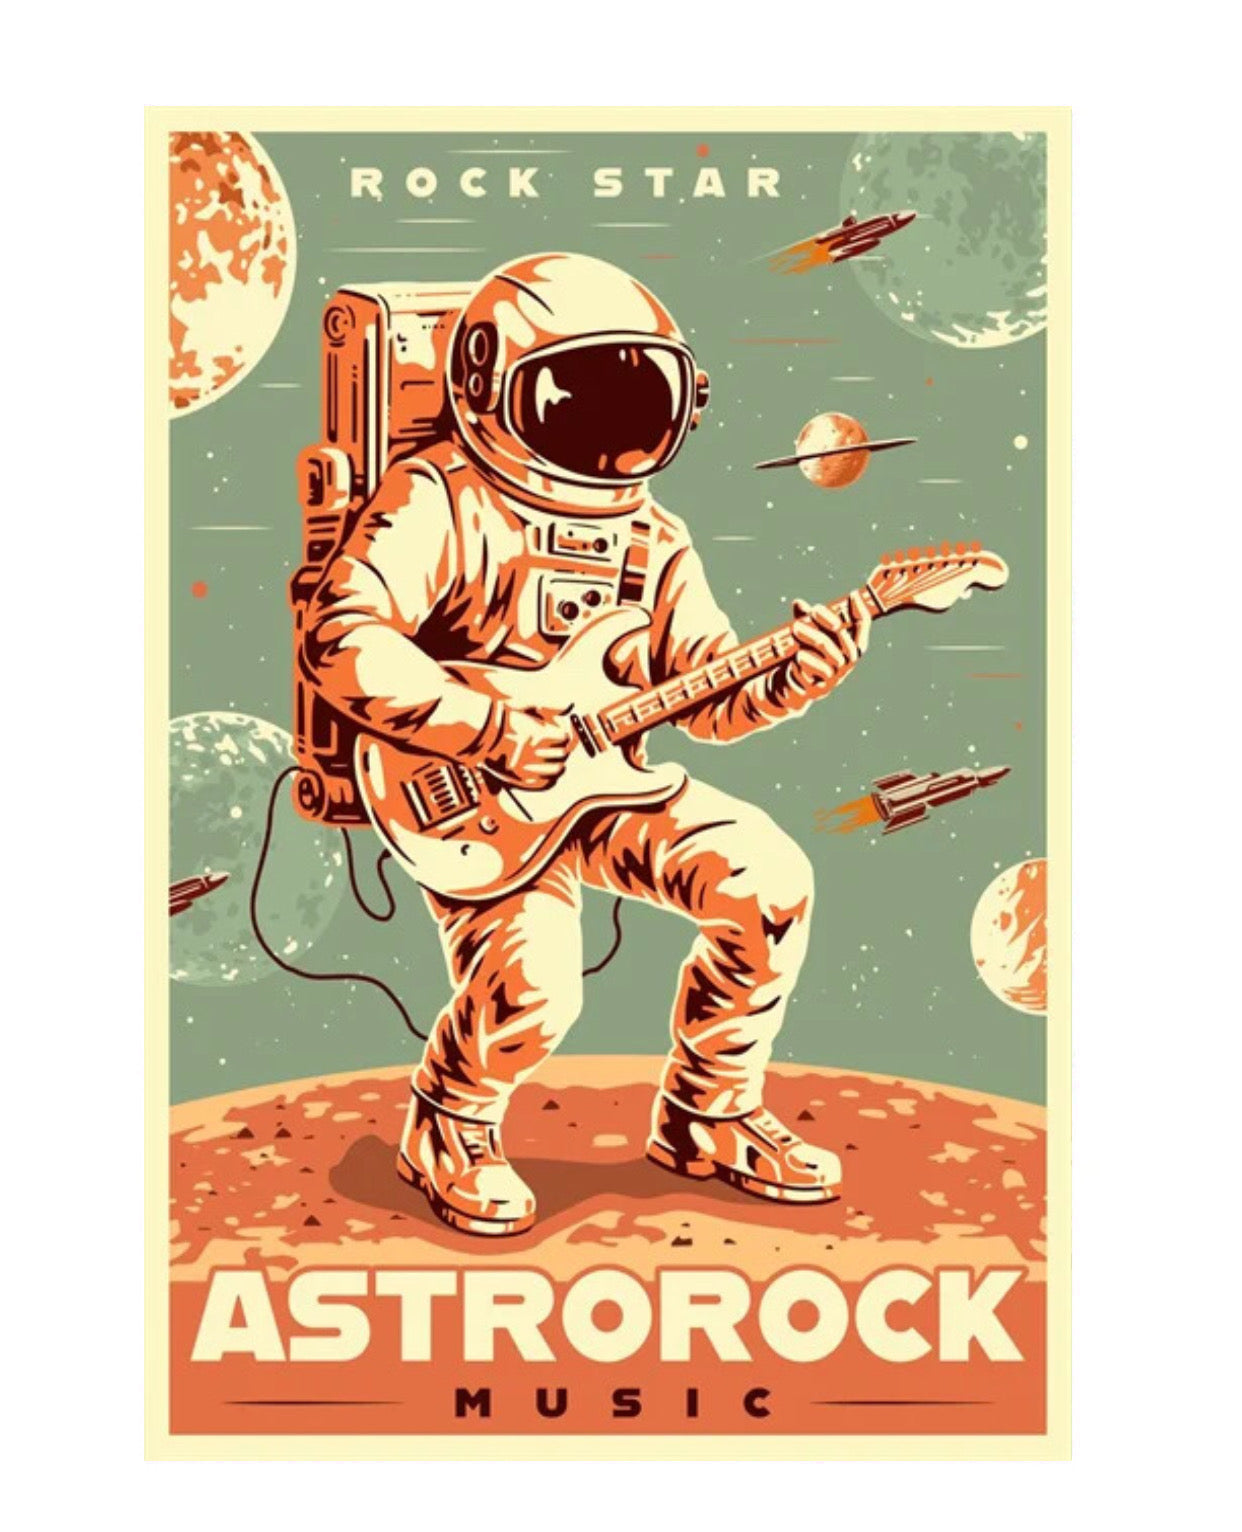 "astrorock music" space poster